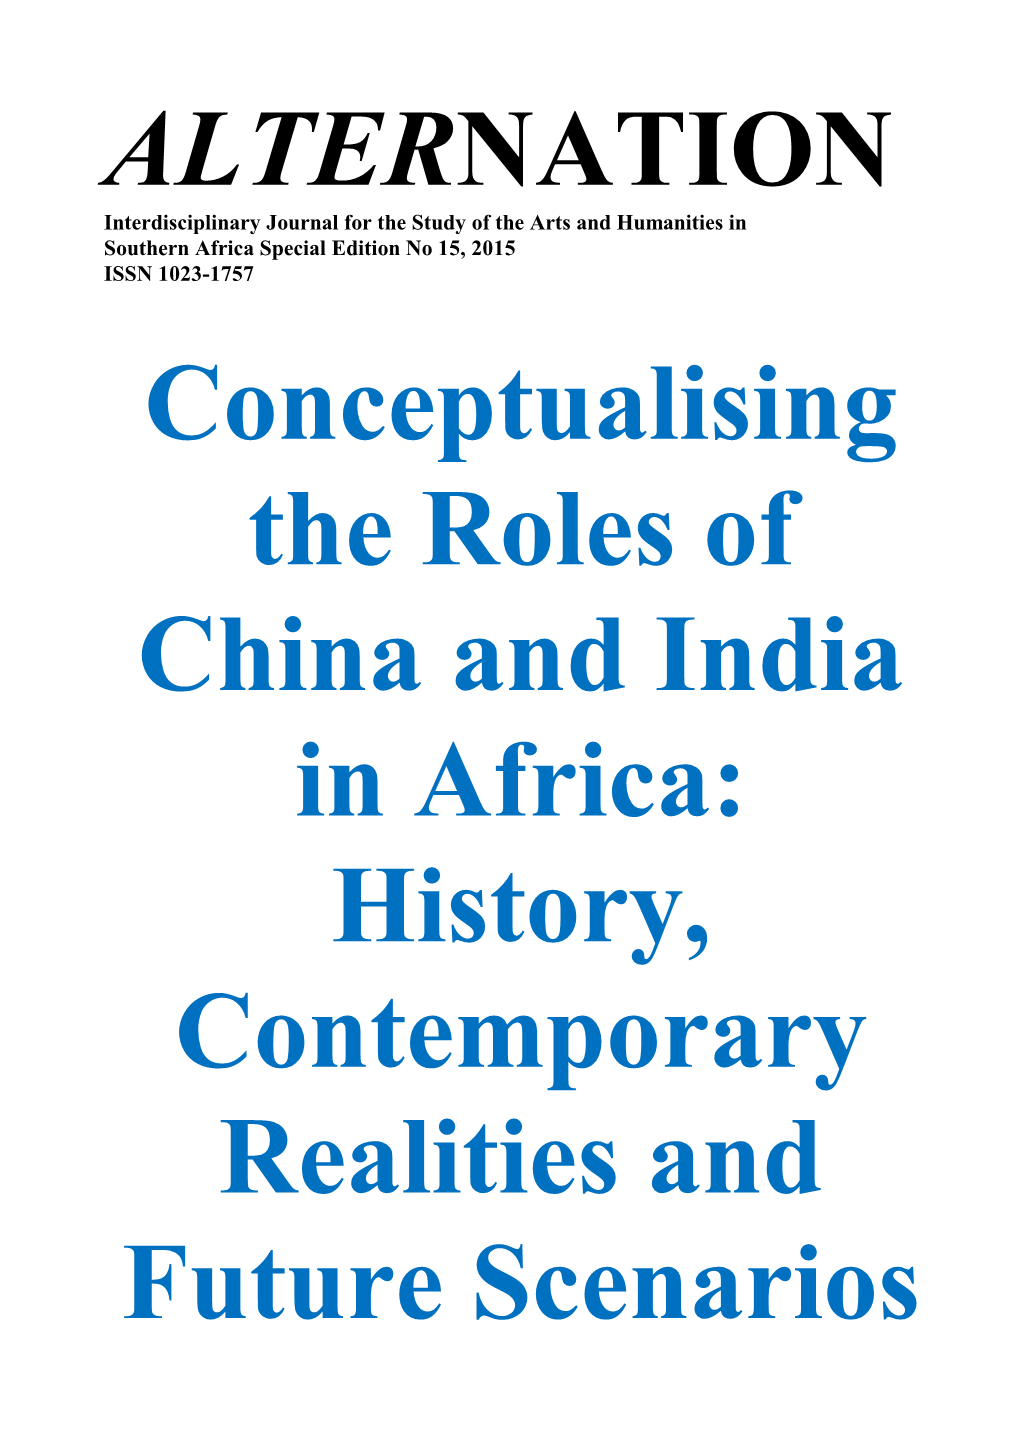 ALTERNATION Conceptualising the Roles of China and India in Africa